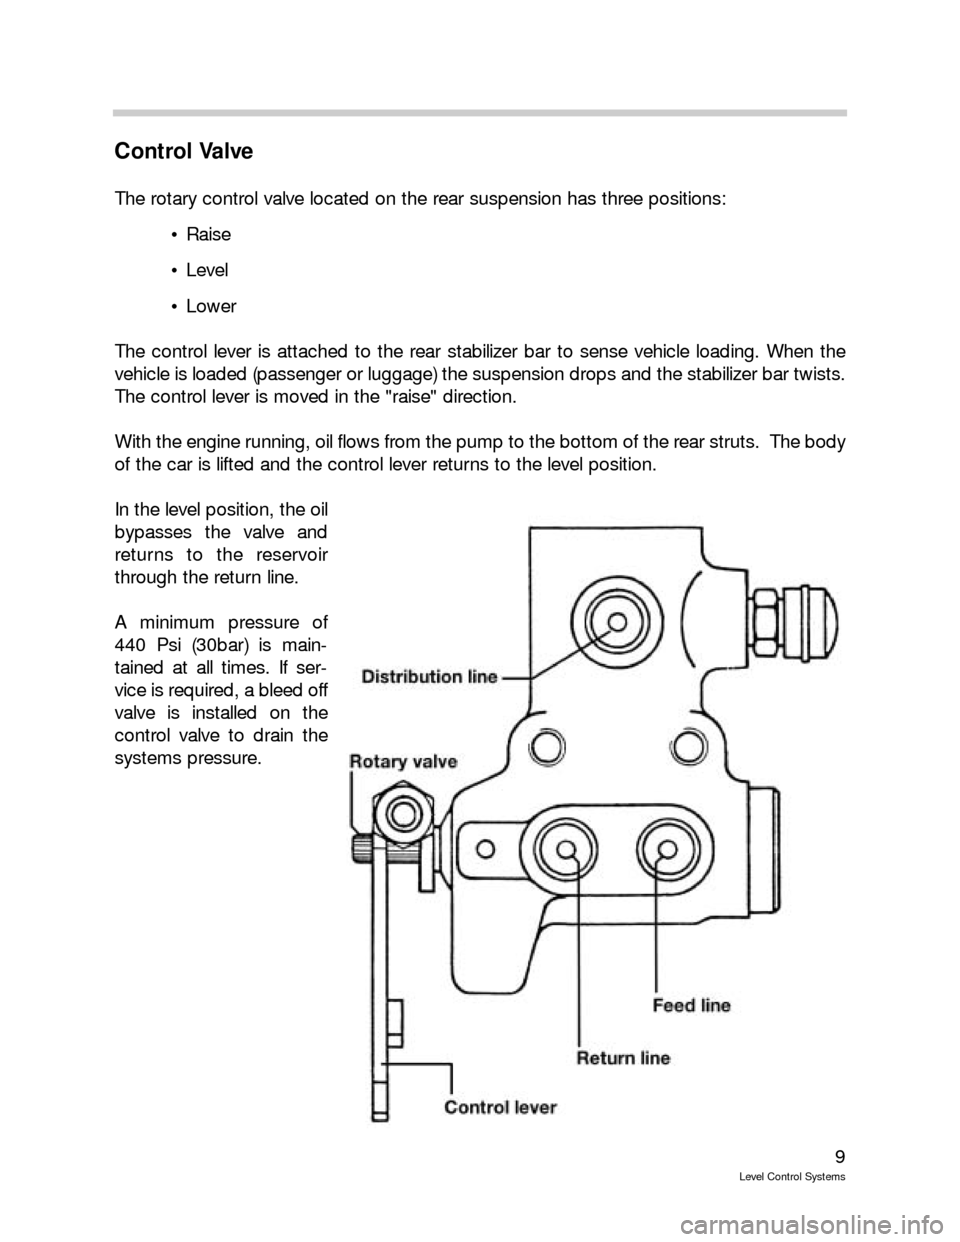 BMW X5 2003 E53 Level Control System Manual 9
Level Control Systems
Control Valve
The rotary control valve located on the rear suspension has three positions:
 Raise
 Level
 Lower
The control lever is attached to the rear stabilizer bar to s